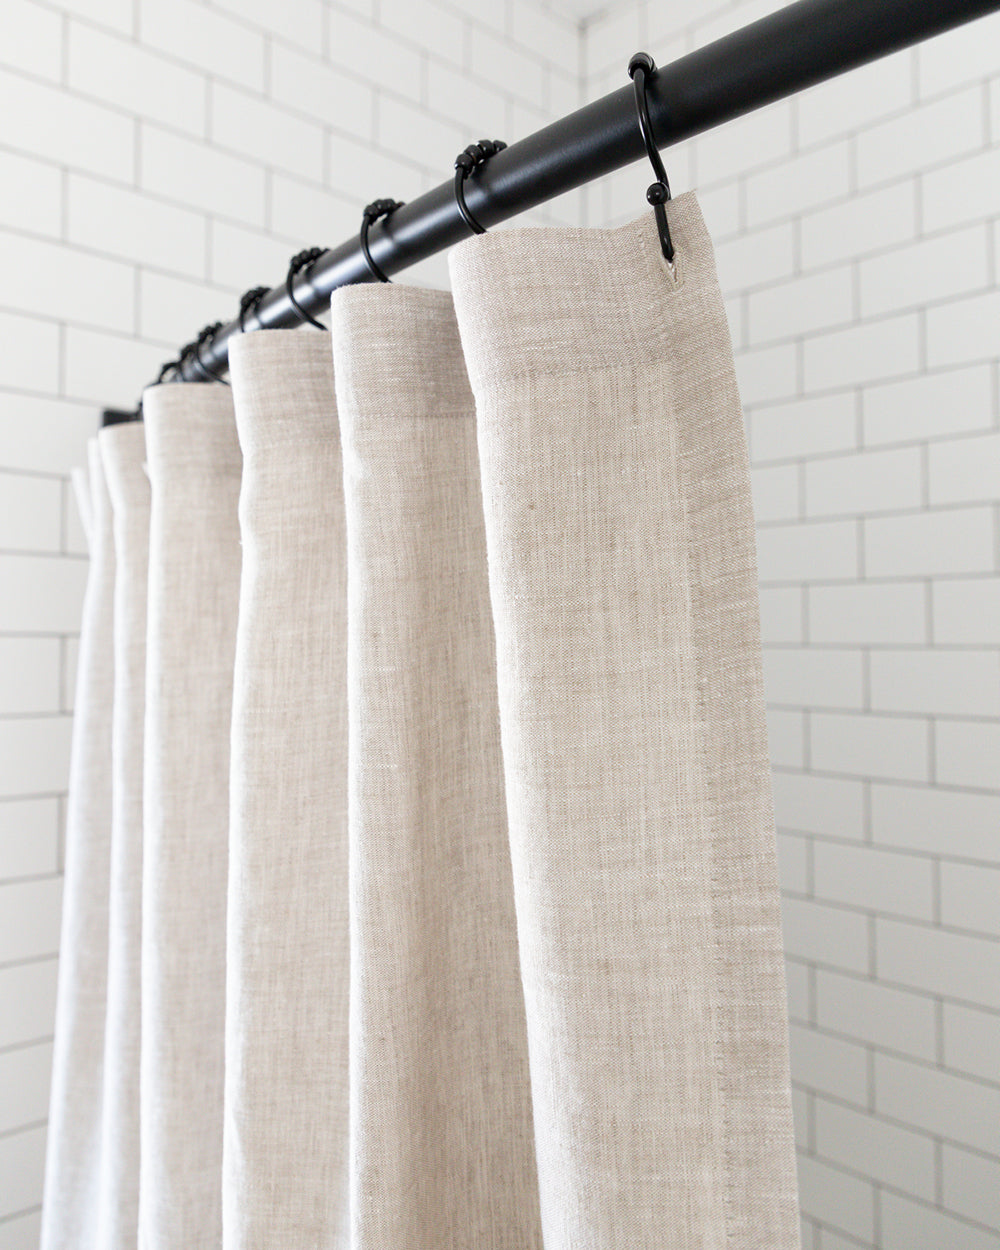 Detail close up of natural linen shower curtain hanging in white tiled shower